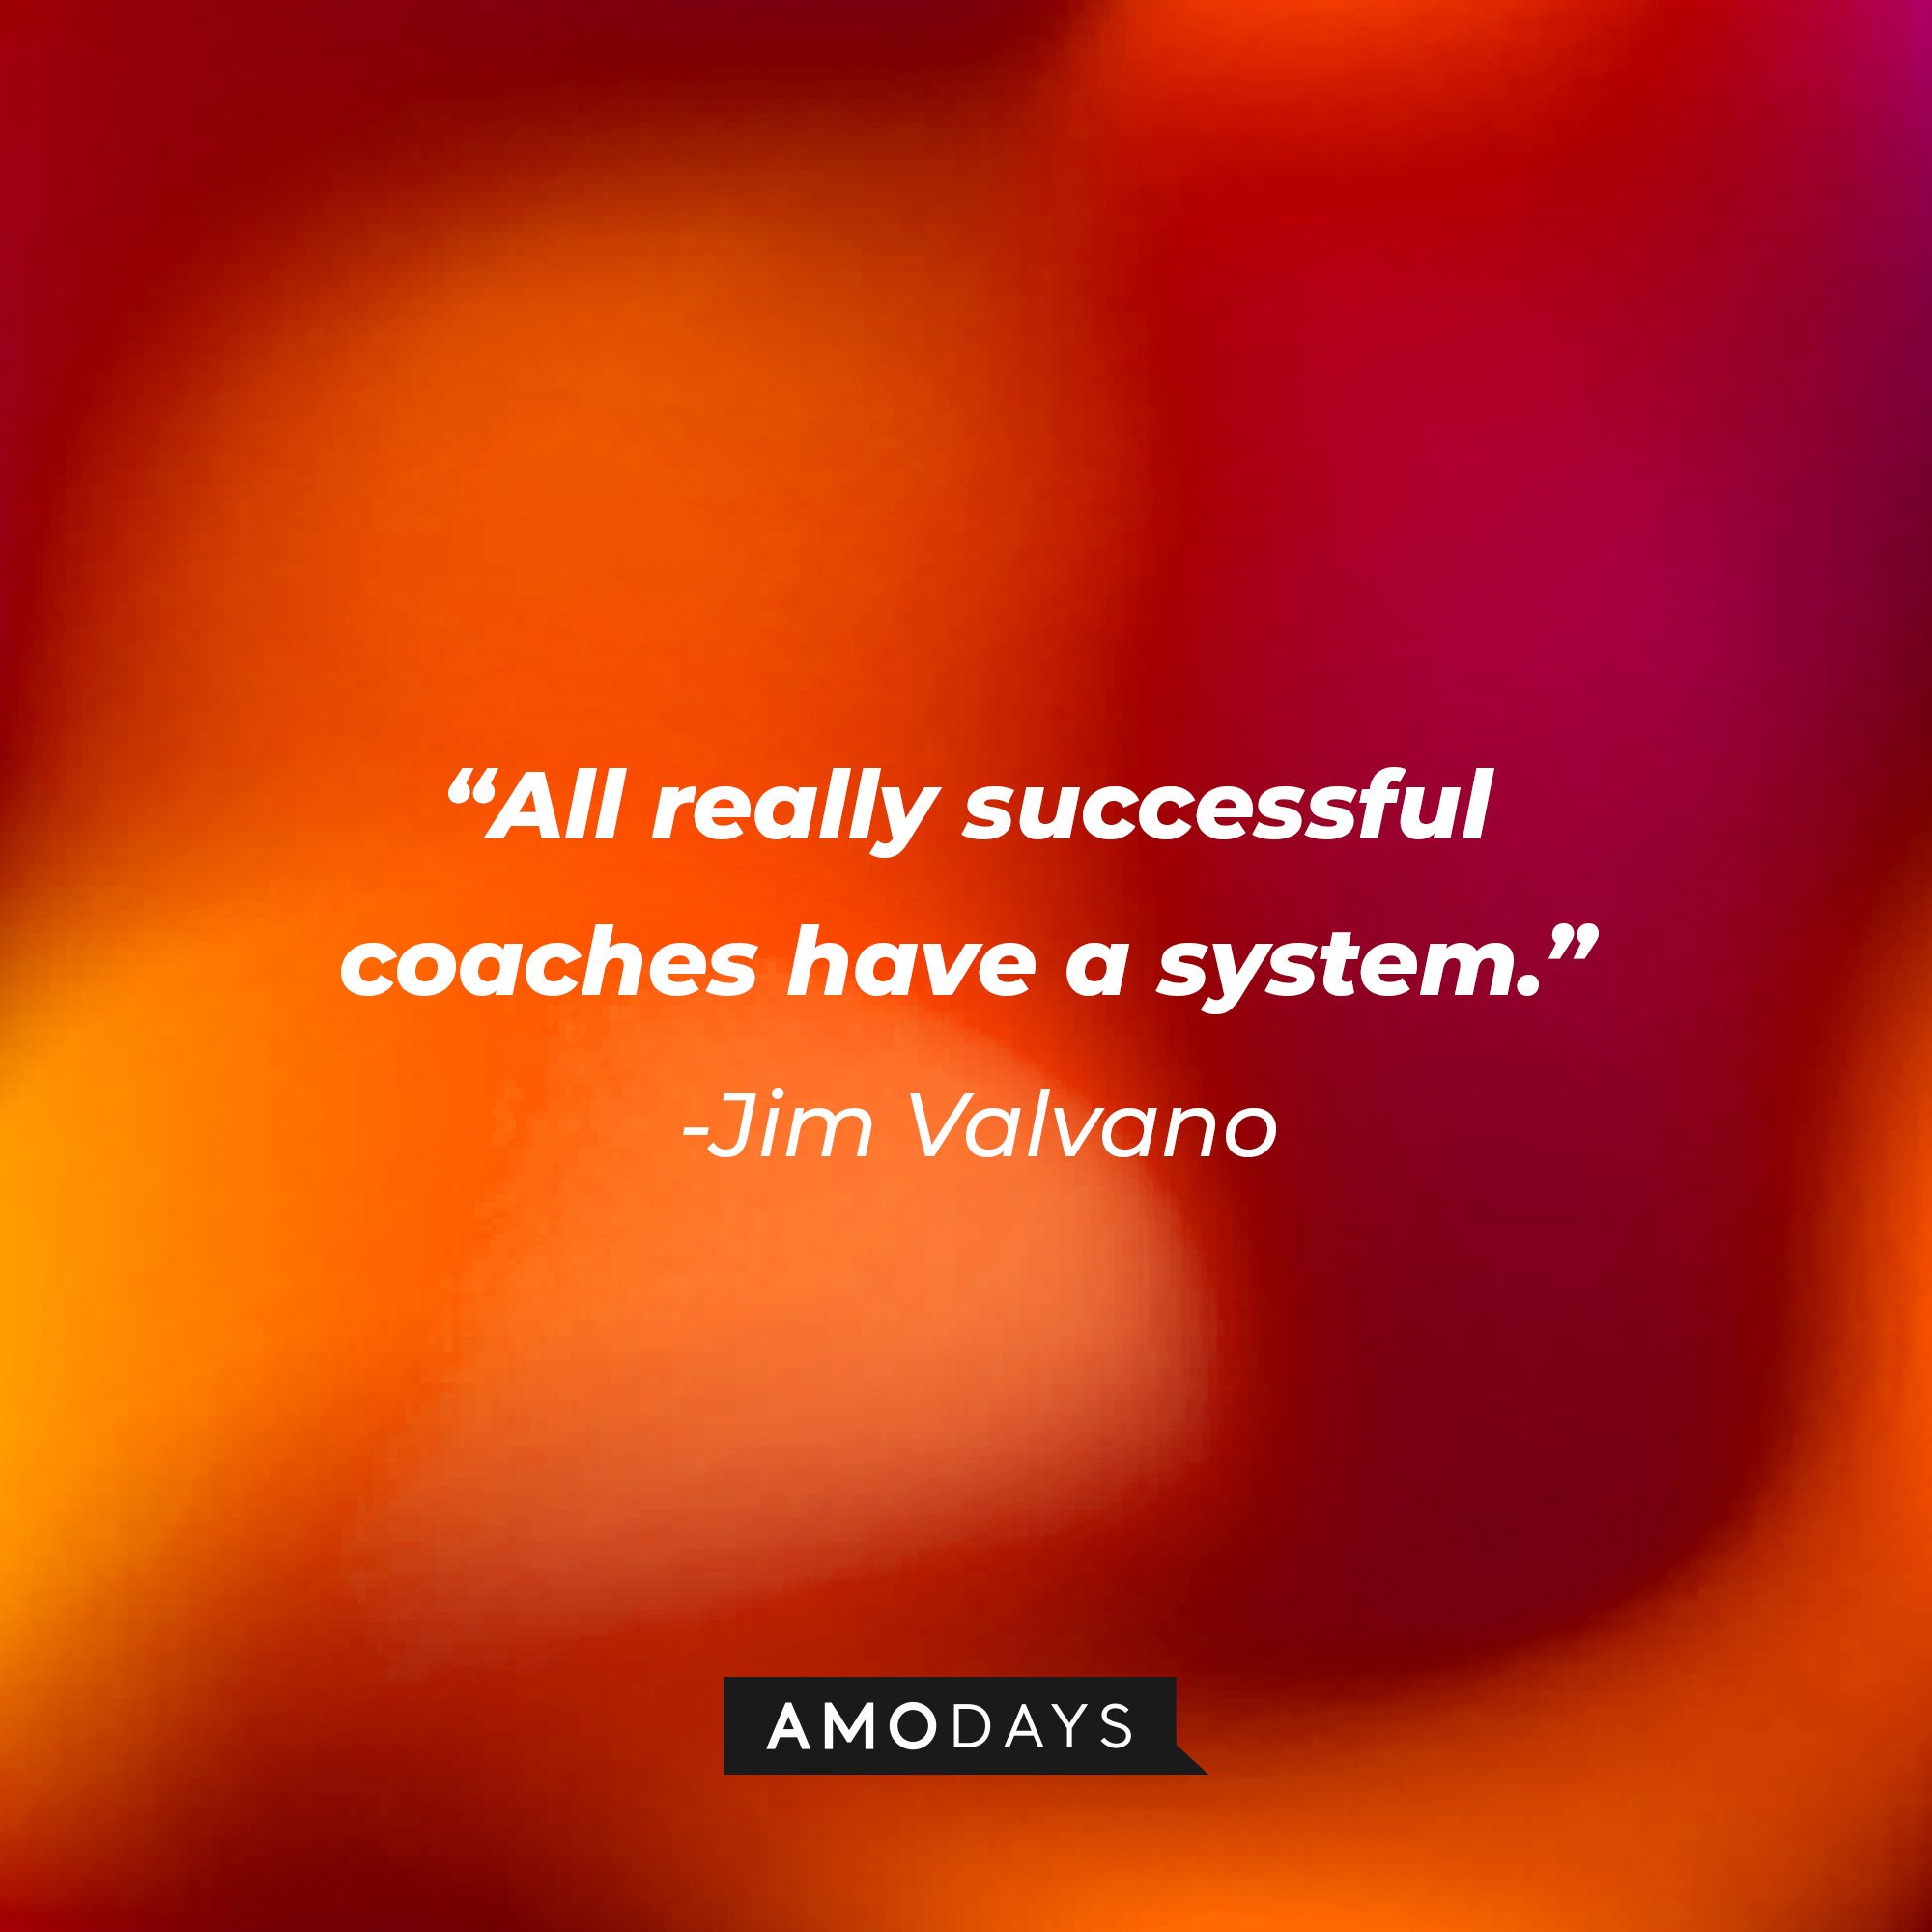 Jim Valvano’s quote: "All really successful coaches have a system." | Image: AmoDays